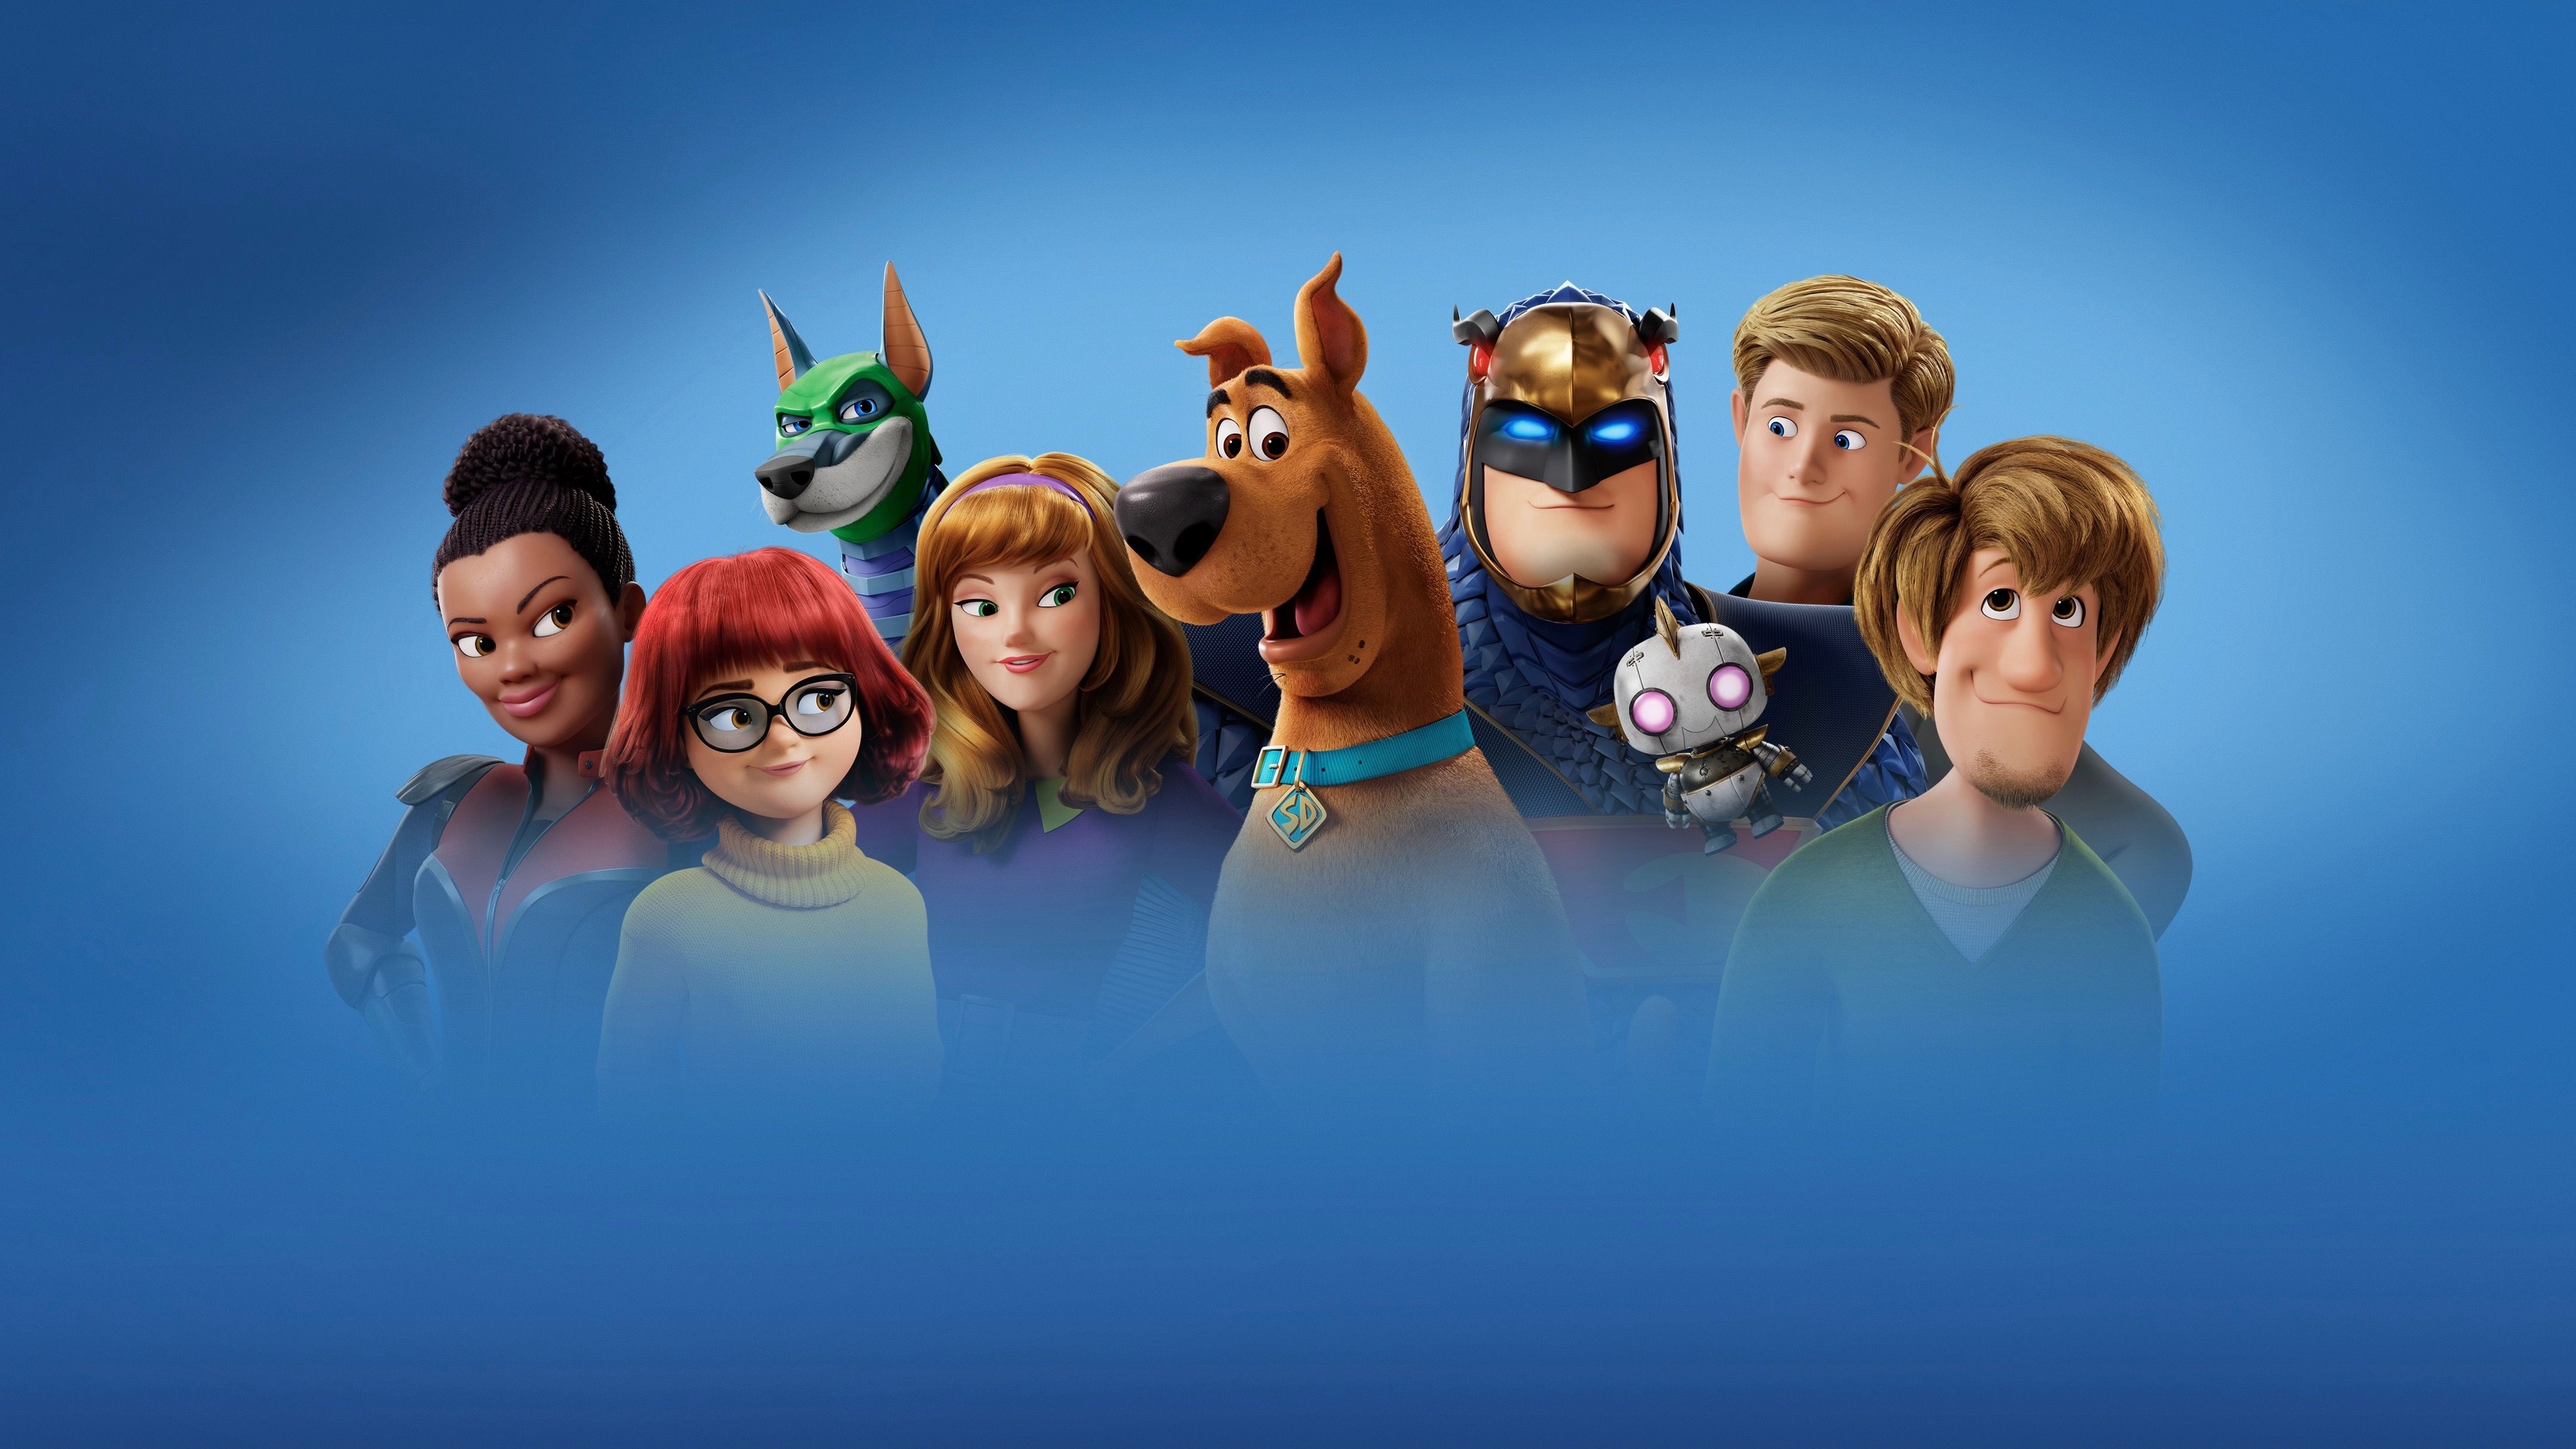 Scoob Movie Characters Wallpaper, HD Movies 4K Wallpaper, Image, Photo and Background